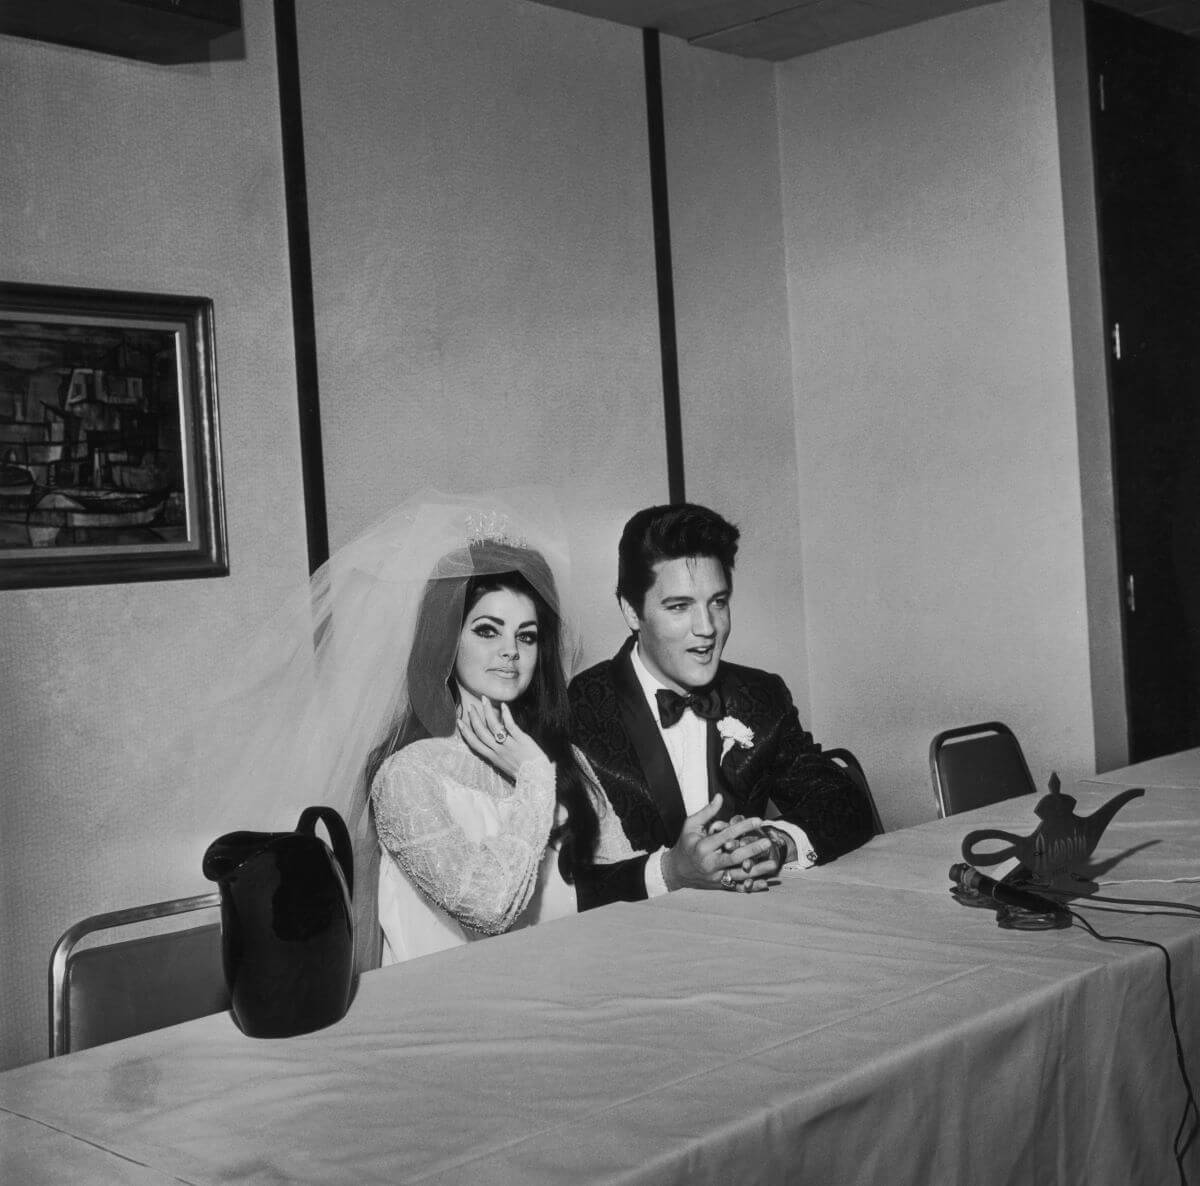 A black and white picture of Priscilla and Elvis Presley sitting together on one side of a table on their wedding day. She wears a dress and veil and he wears a tuxedo.